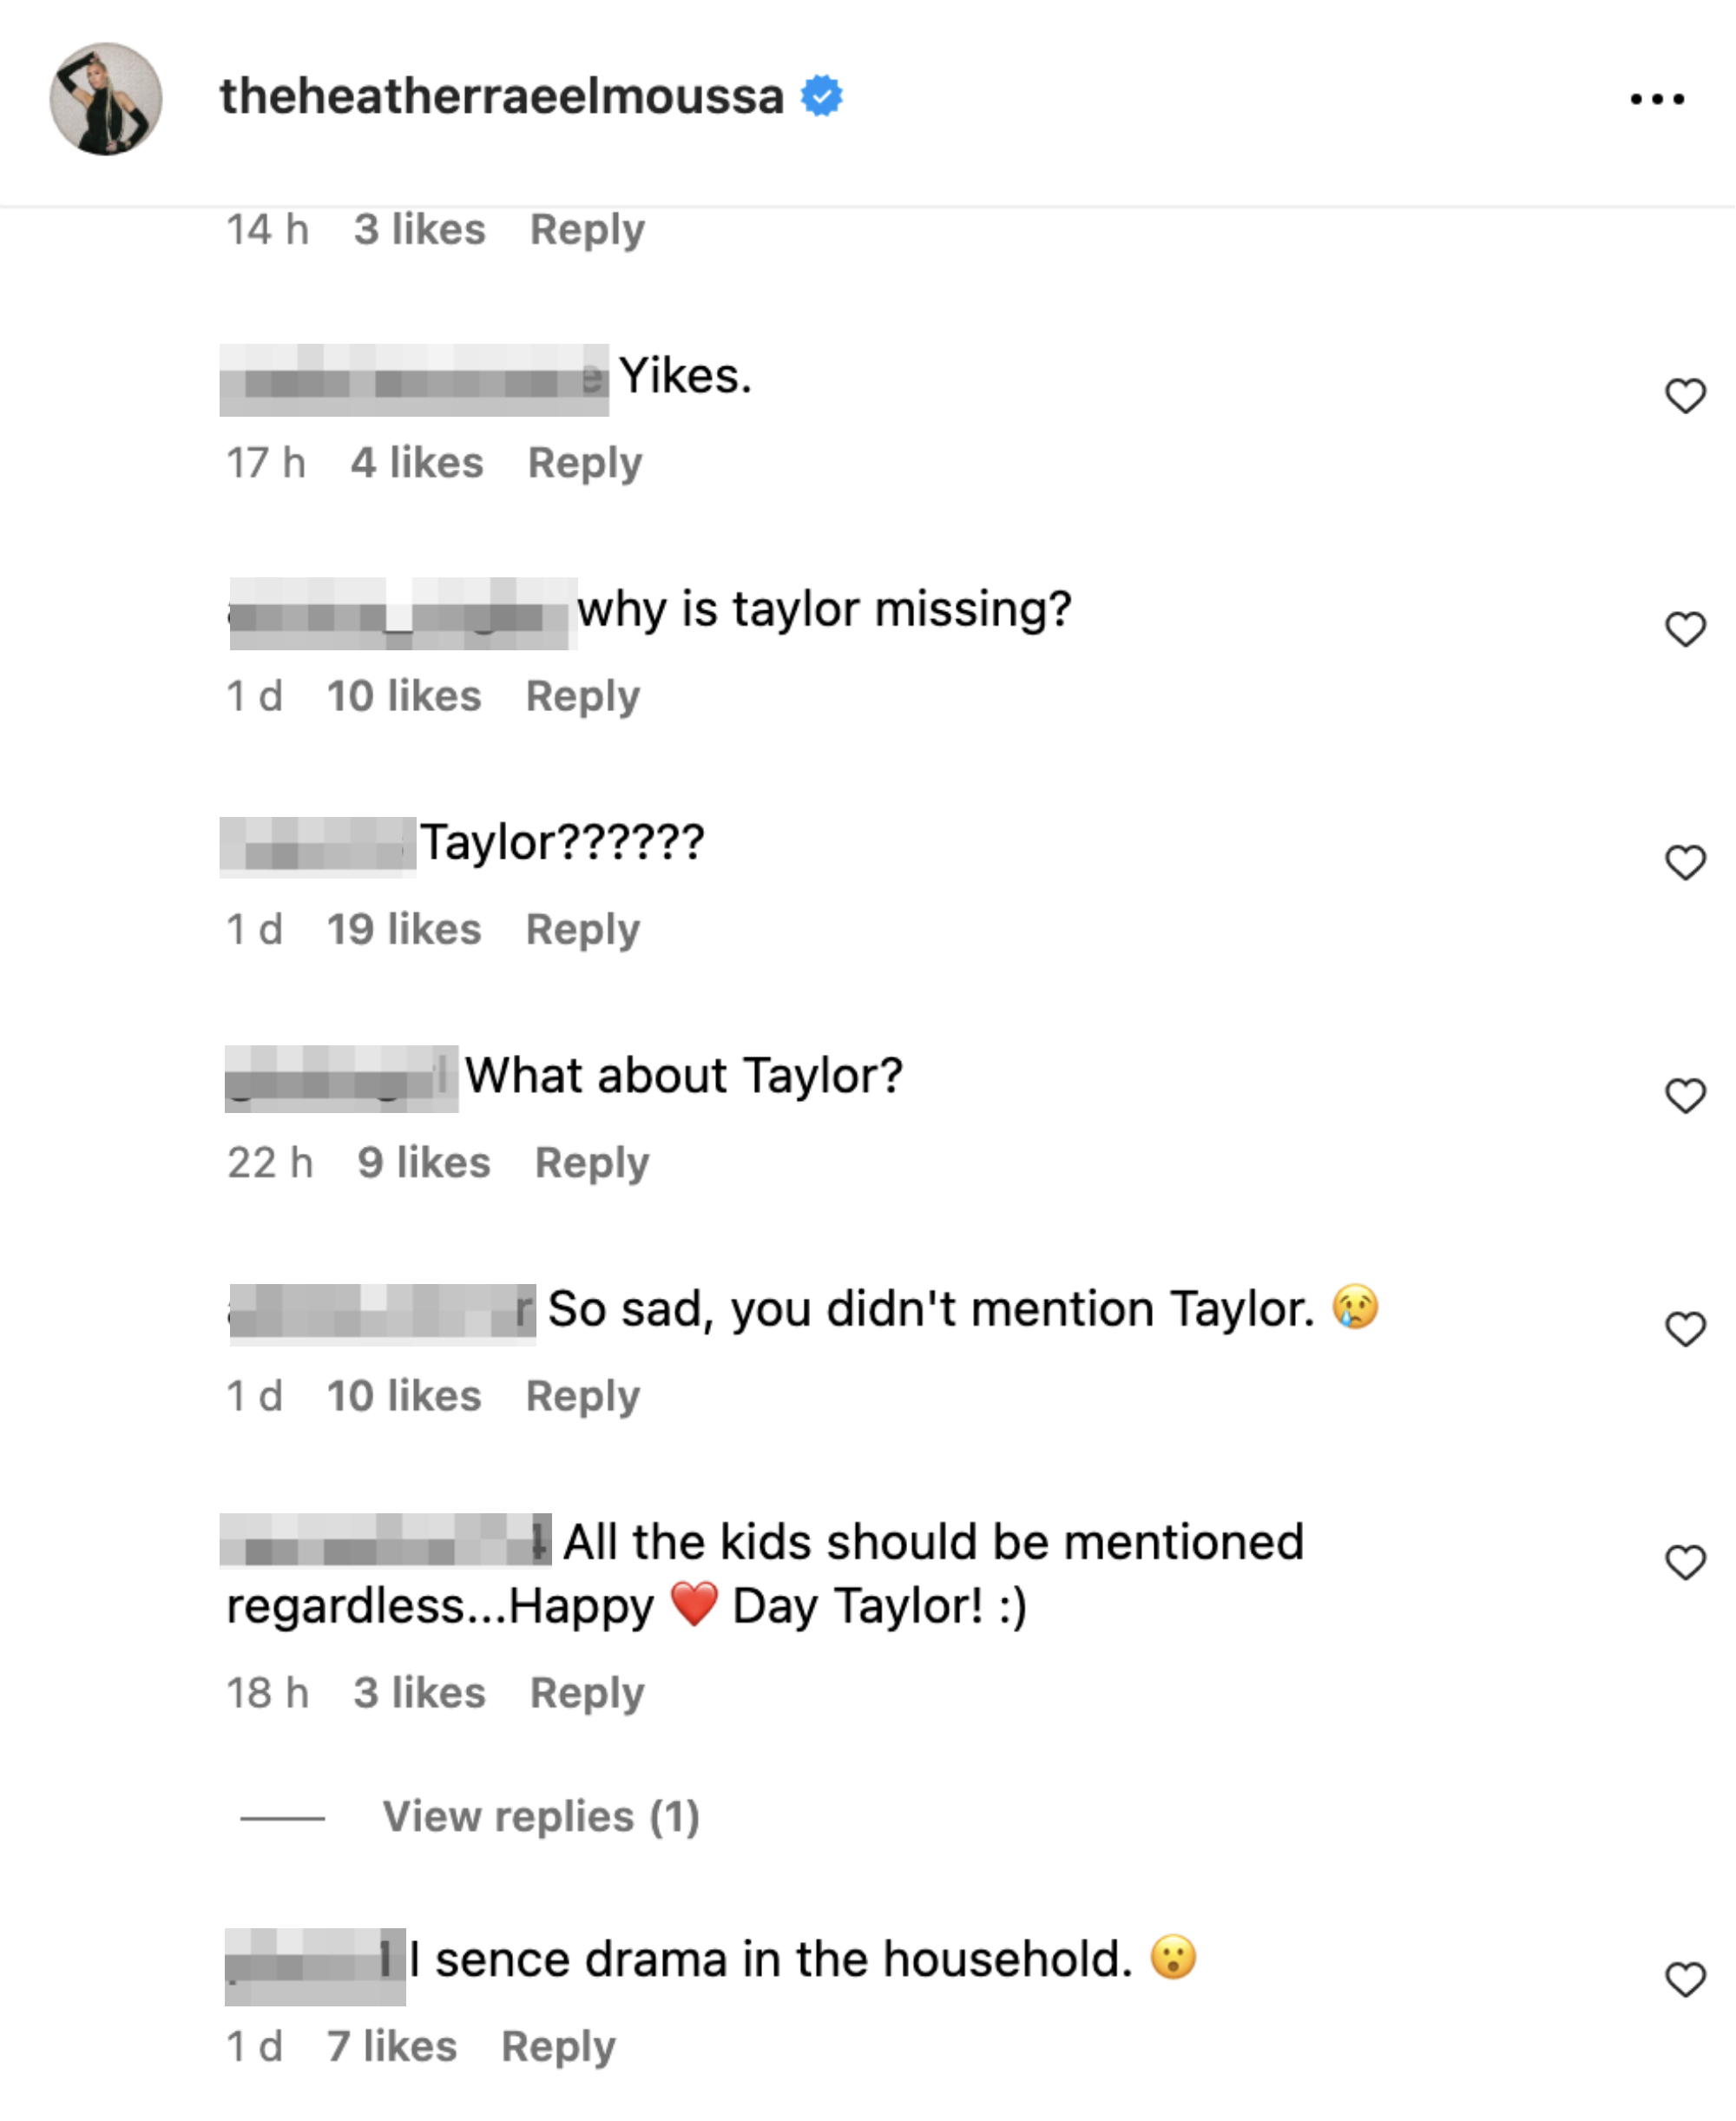 The image shows a screenshot of social media comments concerned about the absence of Taylor from a discussion